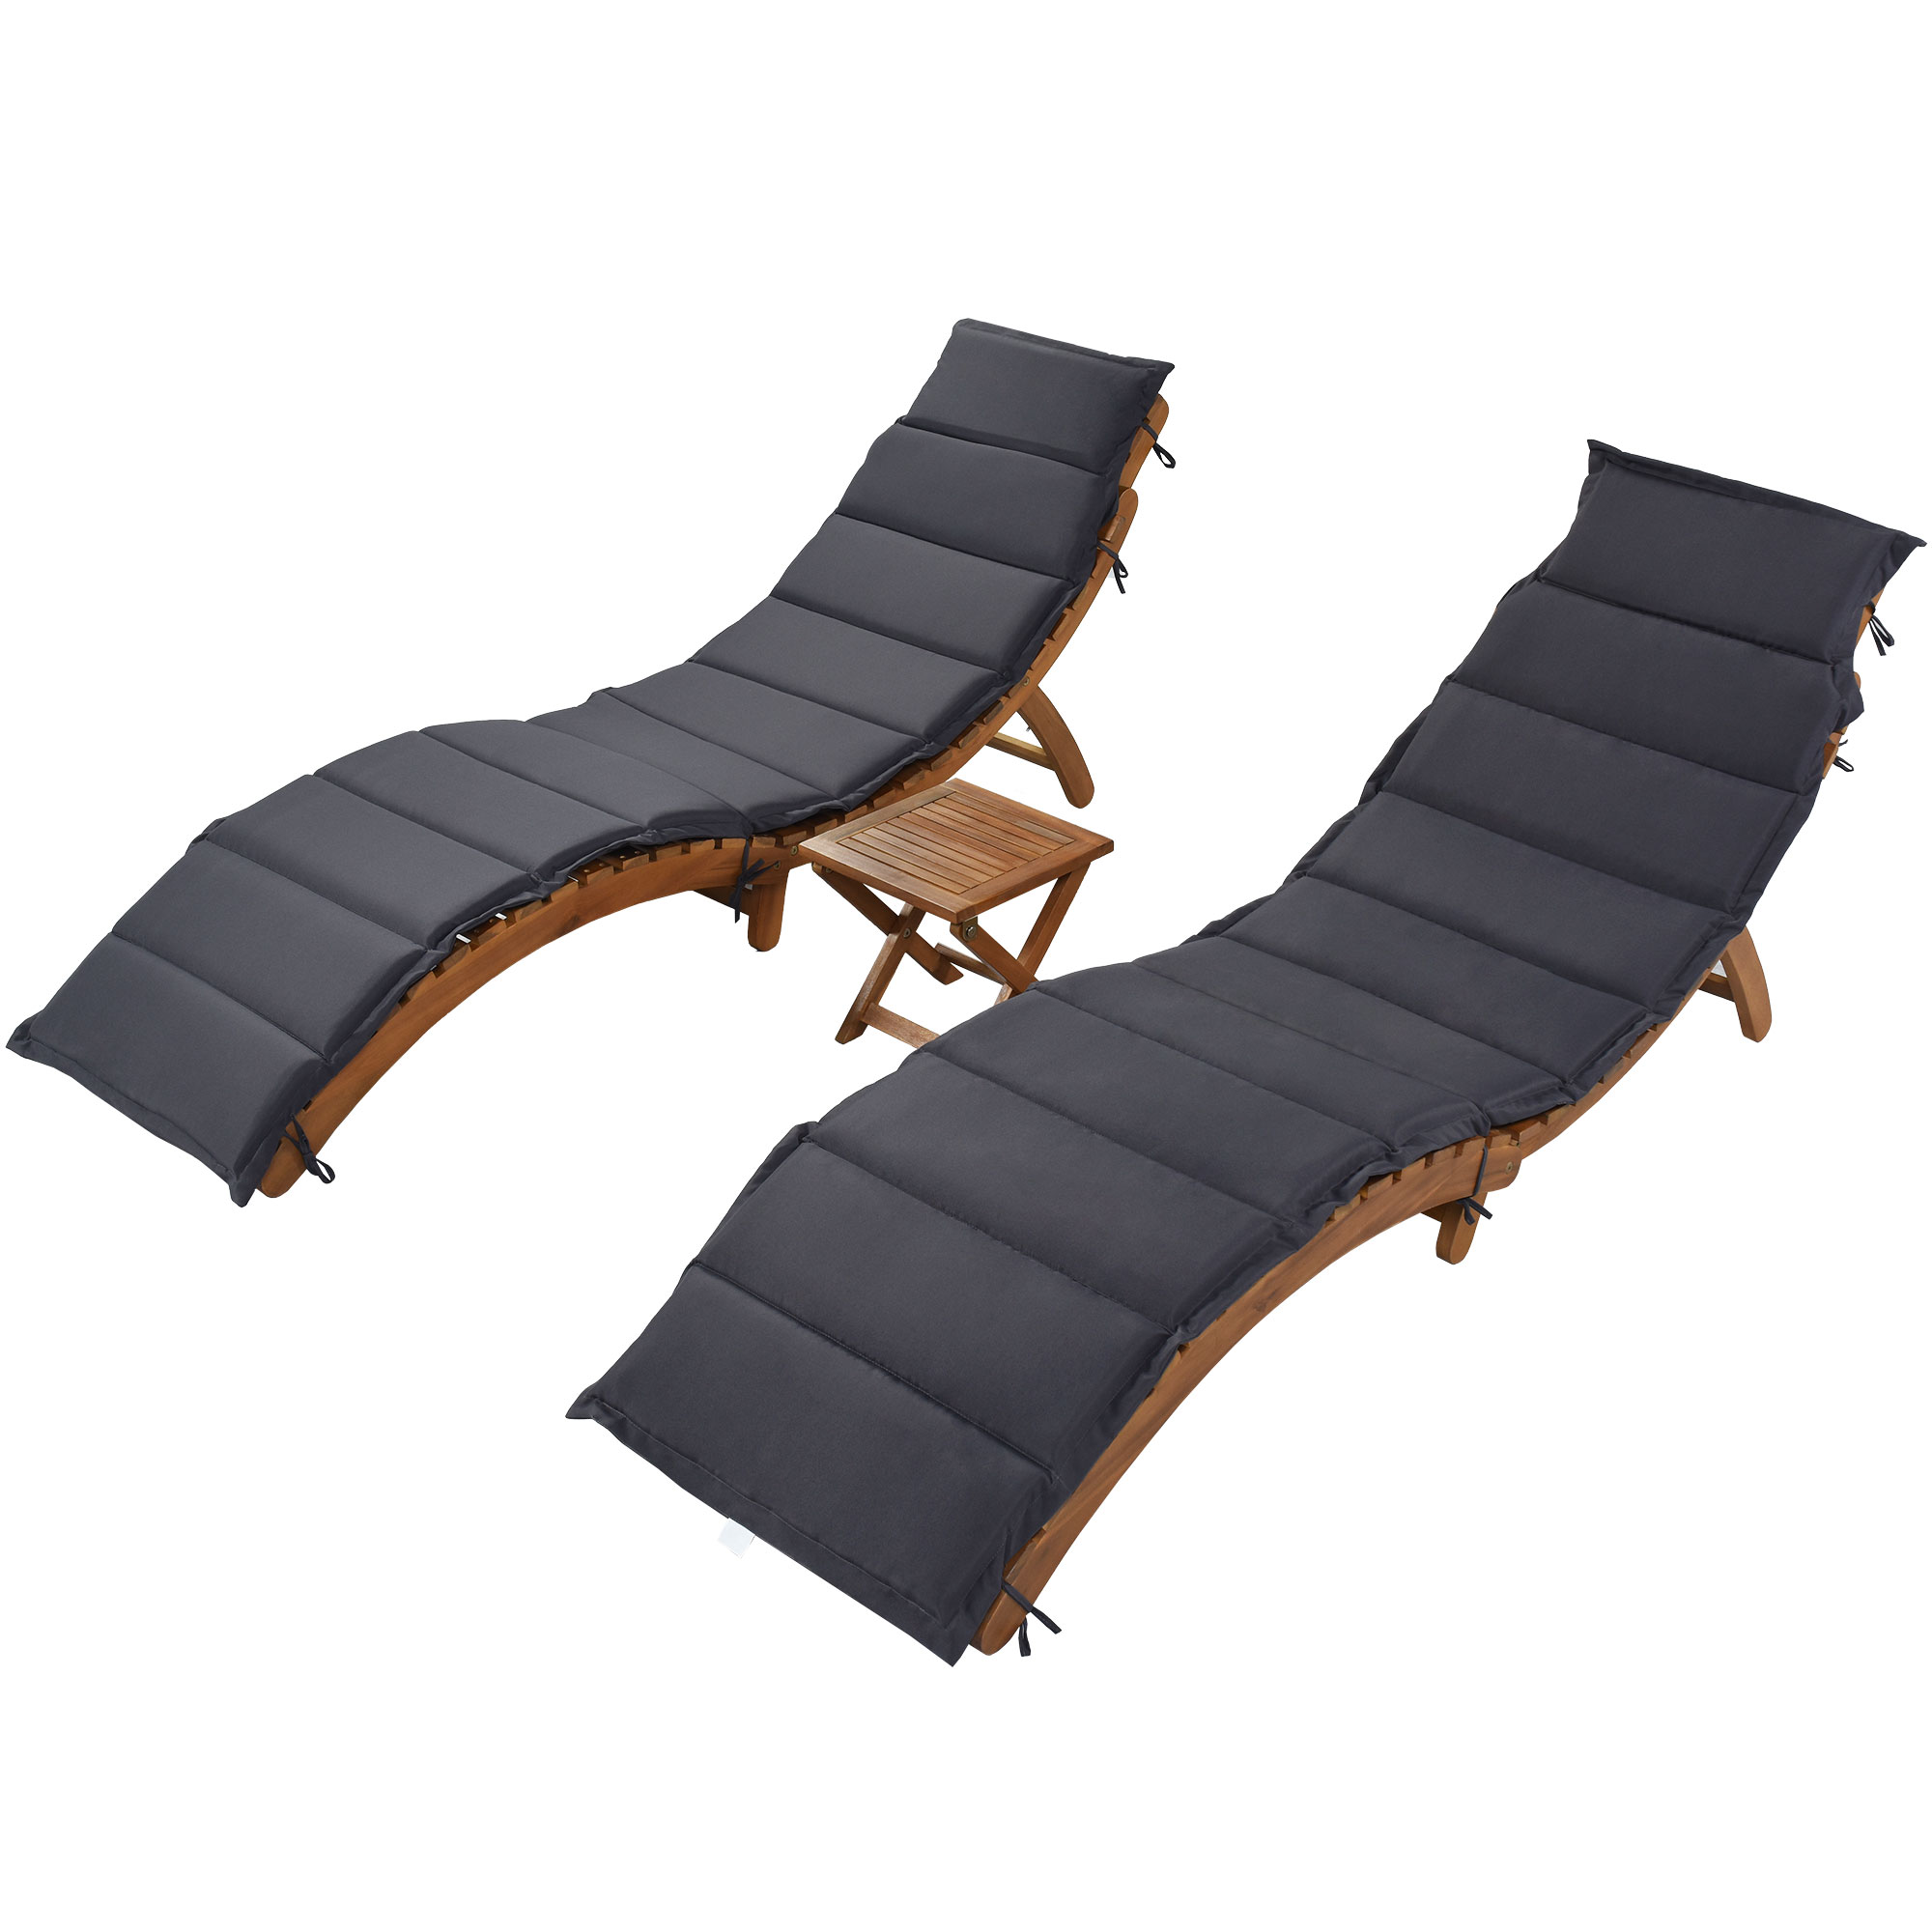 3 Pieces Outdoor Chaise Lounge Set, Wood Patio Furniture Set Extended, 2 Foldable Chaise Lounge Chair with 1 Table, Sun Lounger for Poolside Beach Patio, Brown Lounger + Gray Cushion - image 5 of 9